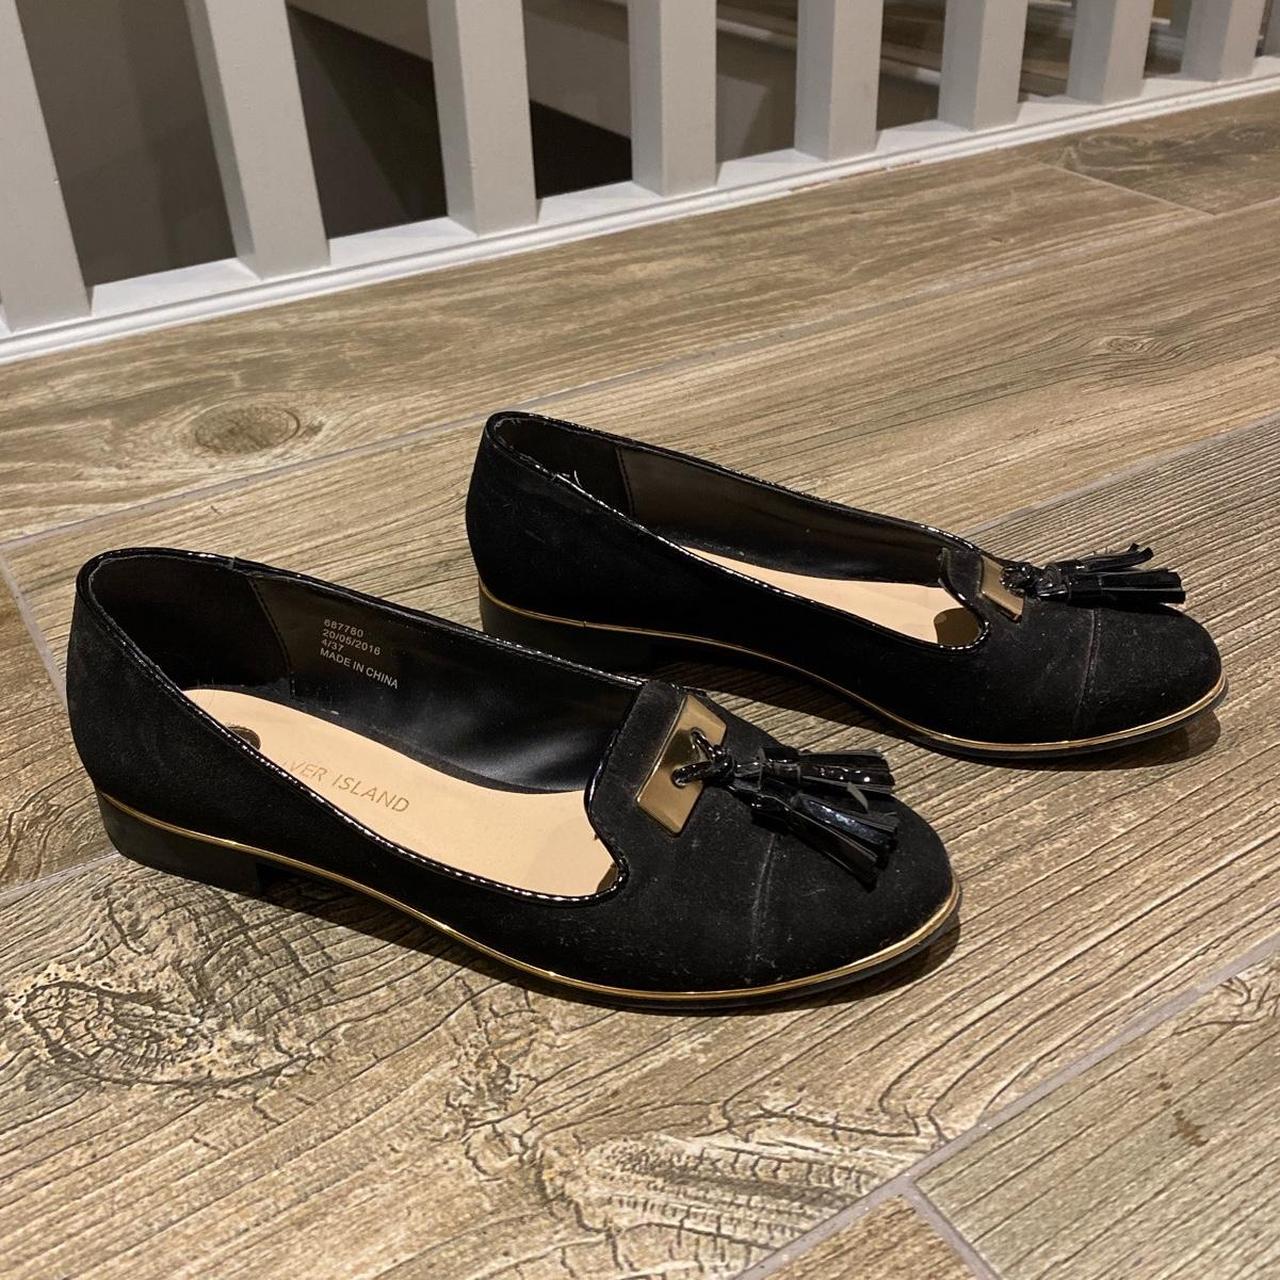 River Island Women's Black and Gold Loafers | Depop